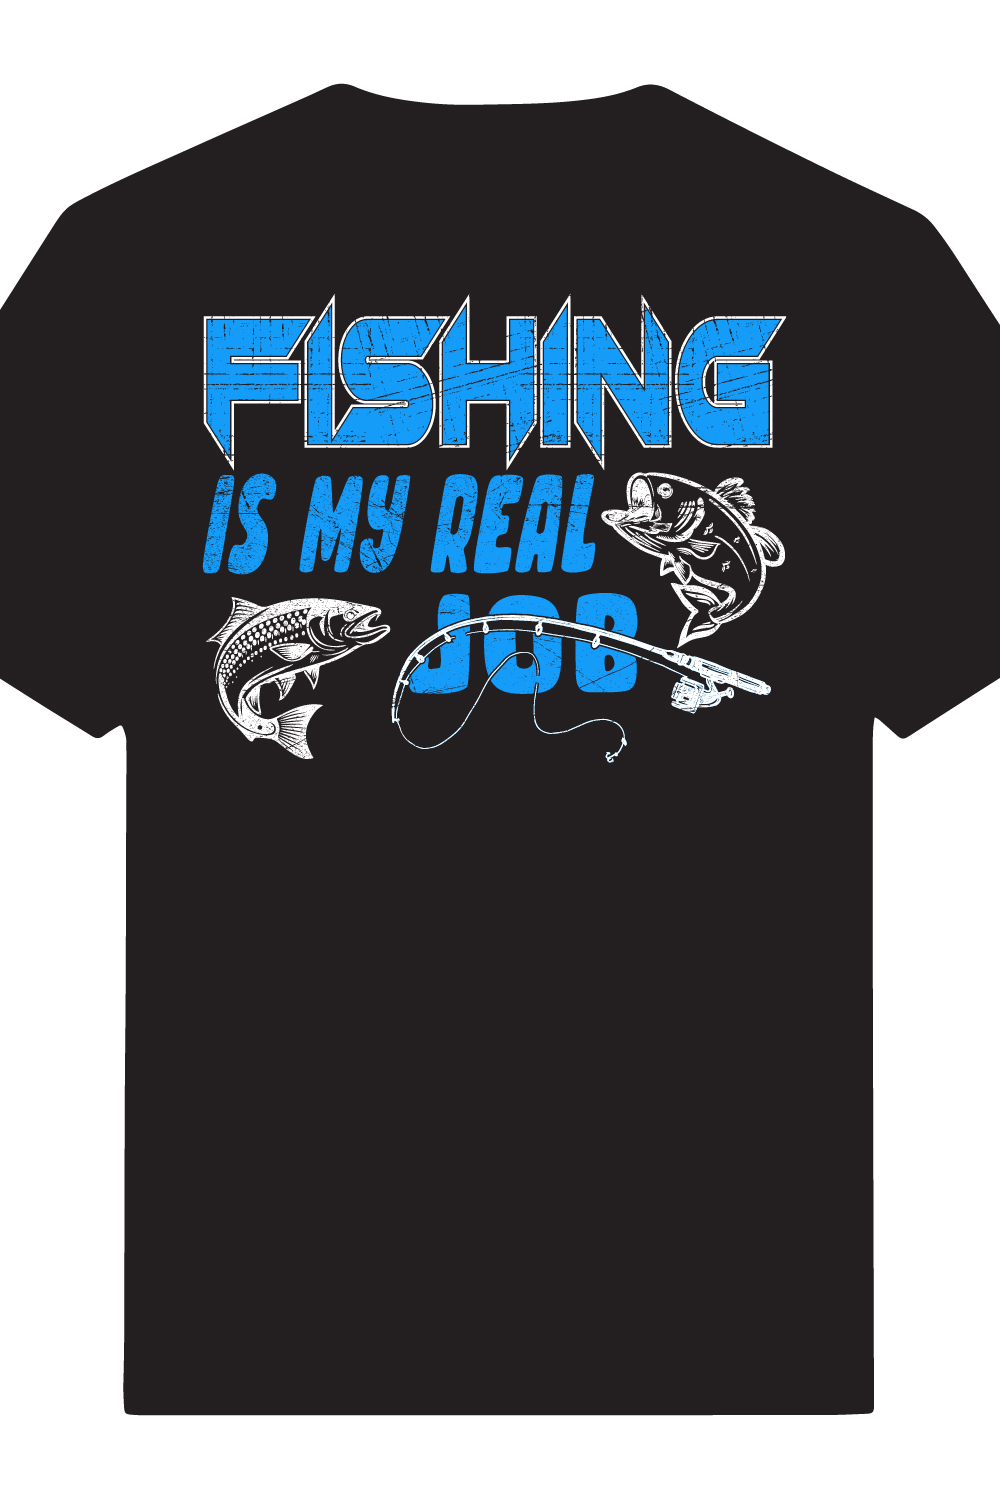 Fishing is my real job typography t-shirt design pinterest preview image.